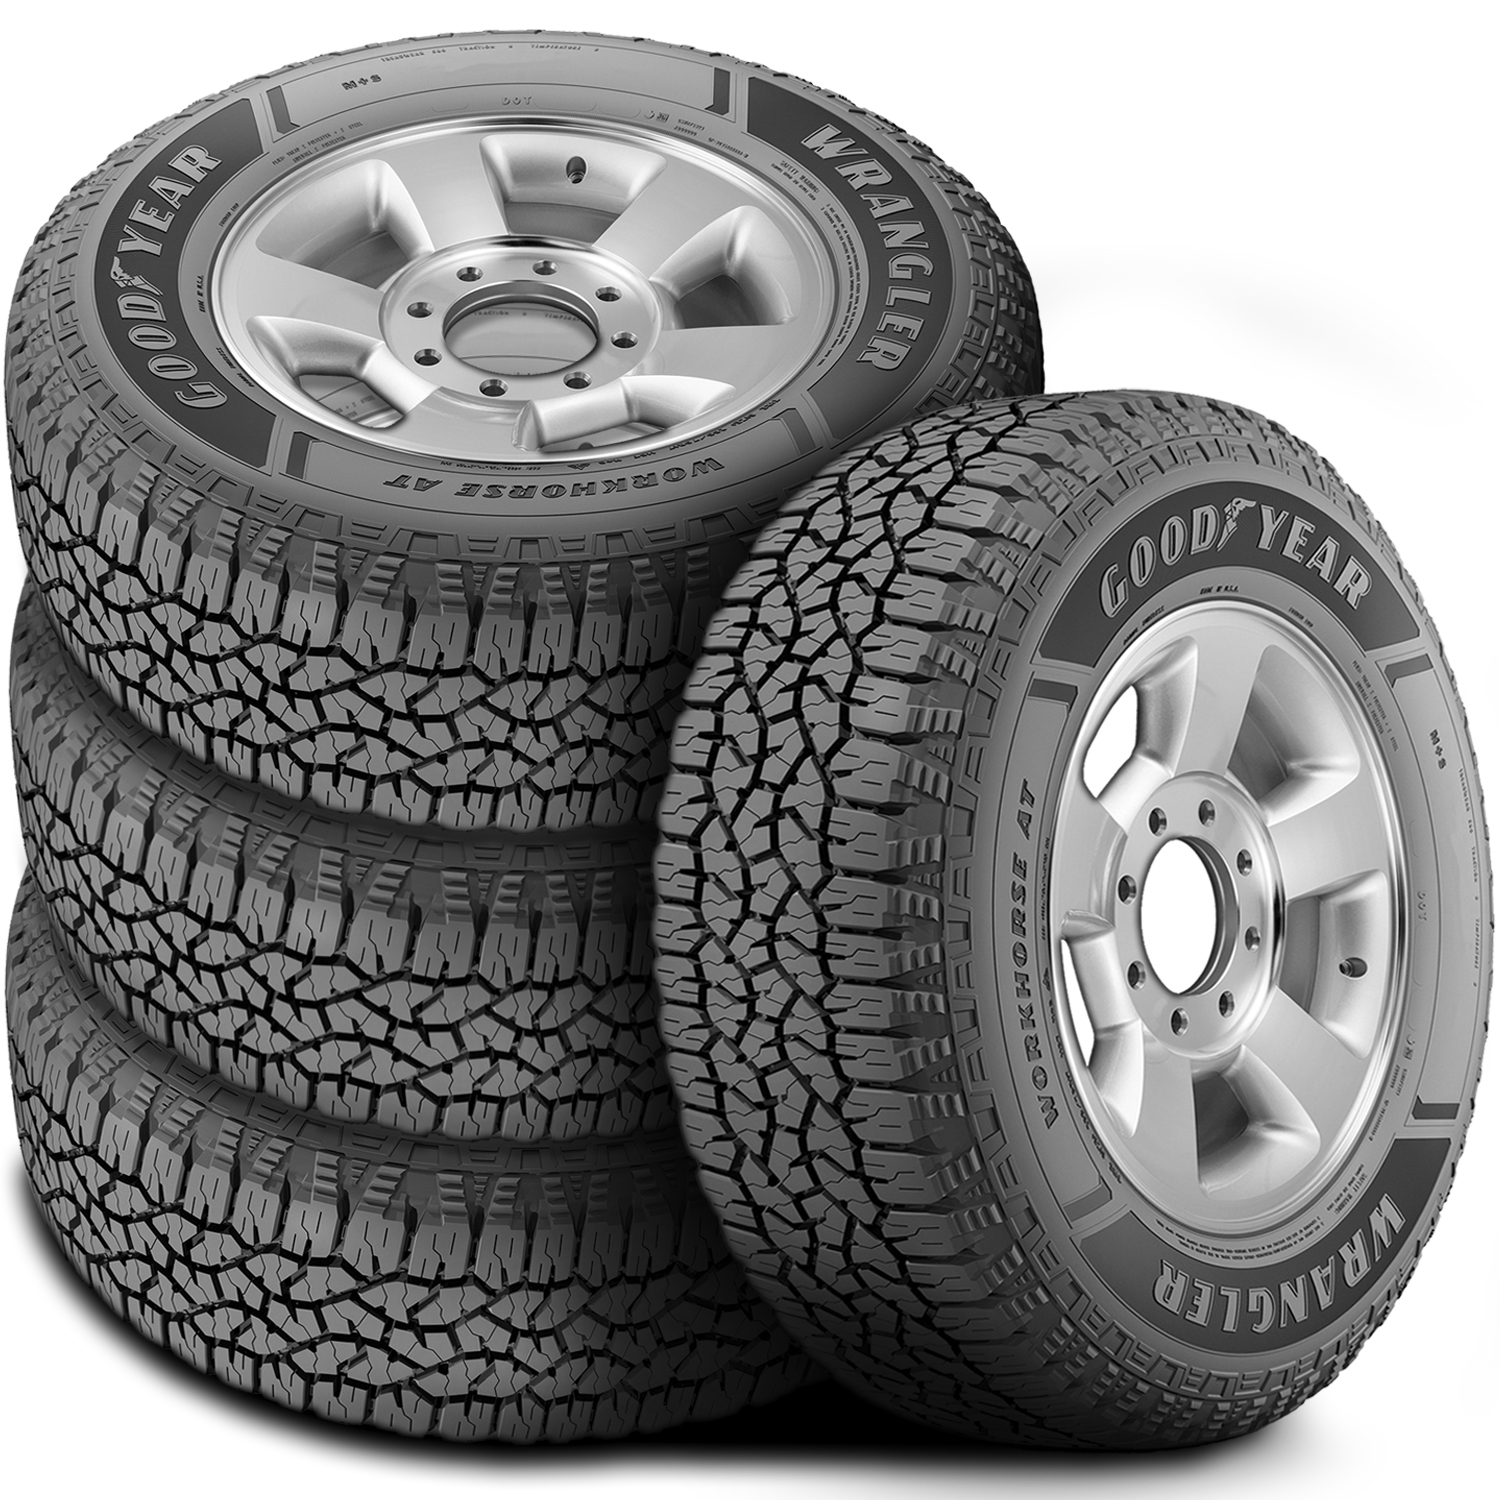 Goodyear 4 Tires Goodyear Wrangler Workhorse AT LT 235/85R16 Load E 10 Ply All Terrain